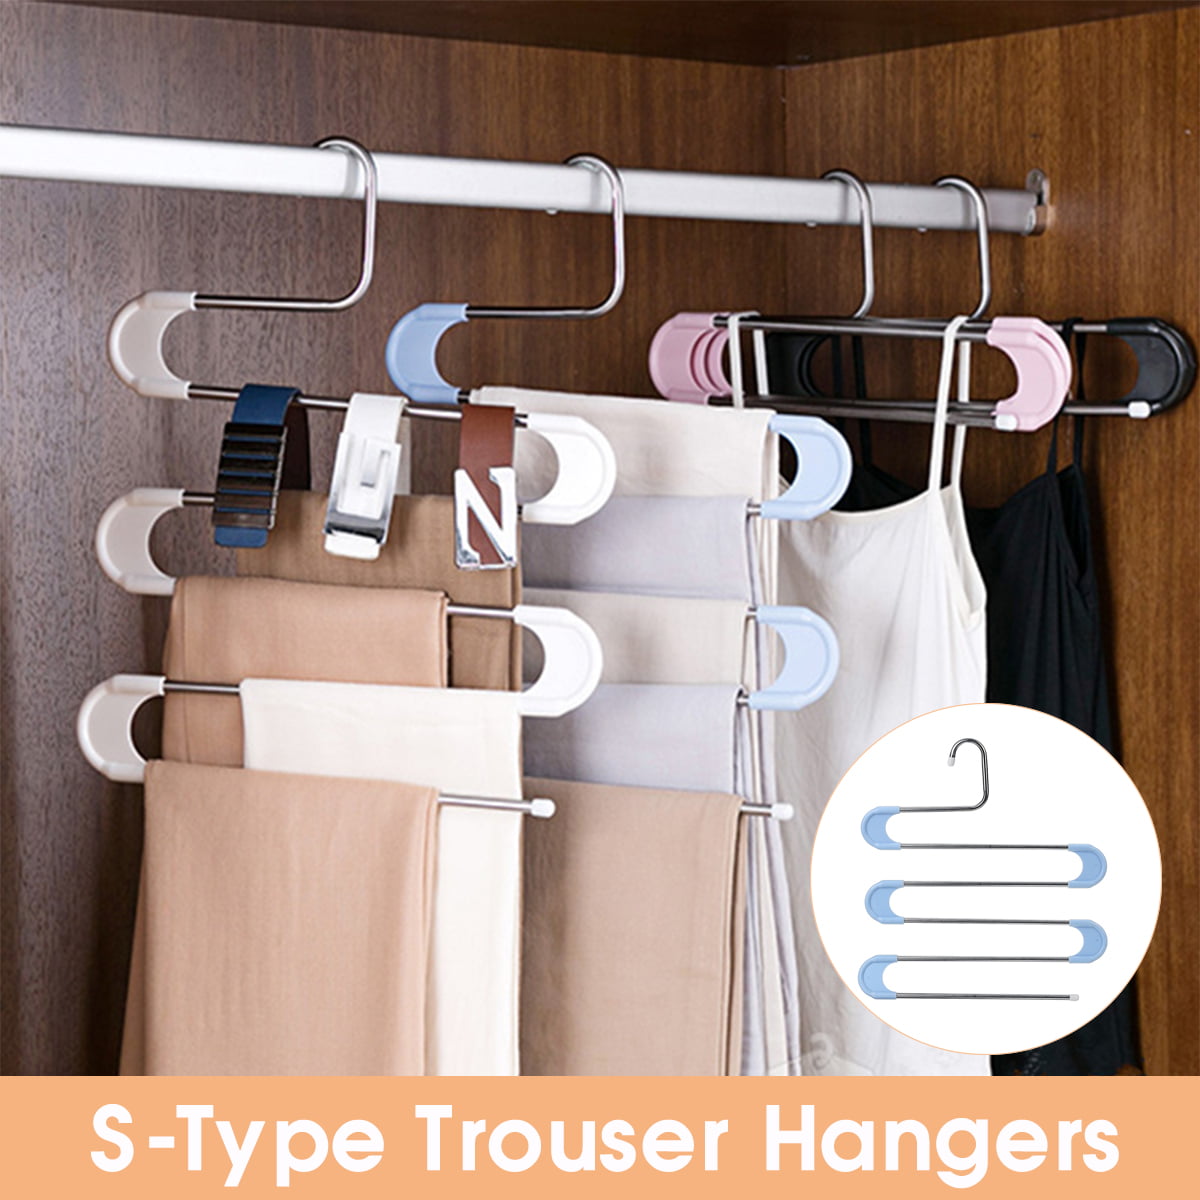 Pants Scarf Space Saving S Shaped Hangers for all Clothes Just Hang Jeans 10 Pack Non Slip Organizer for your Closet at Home